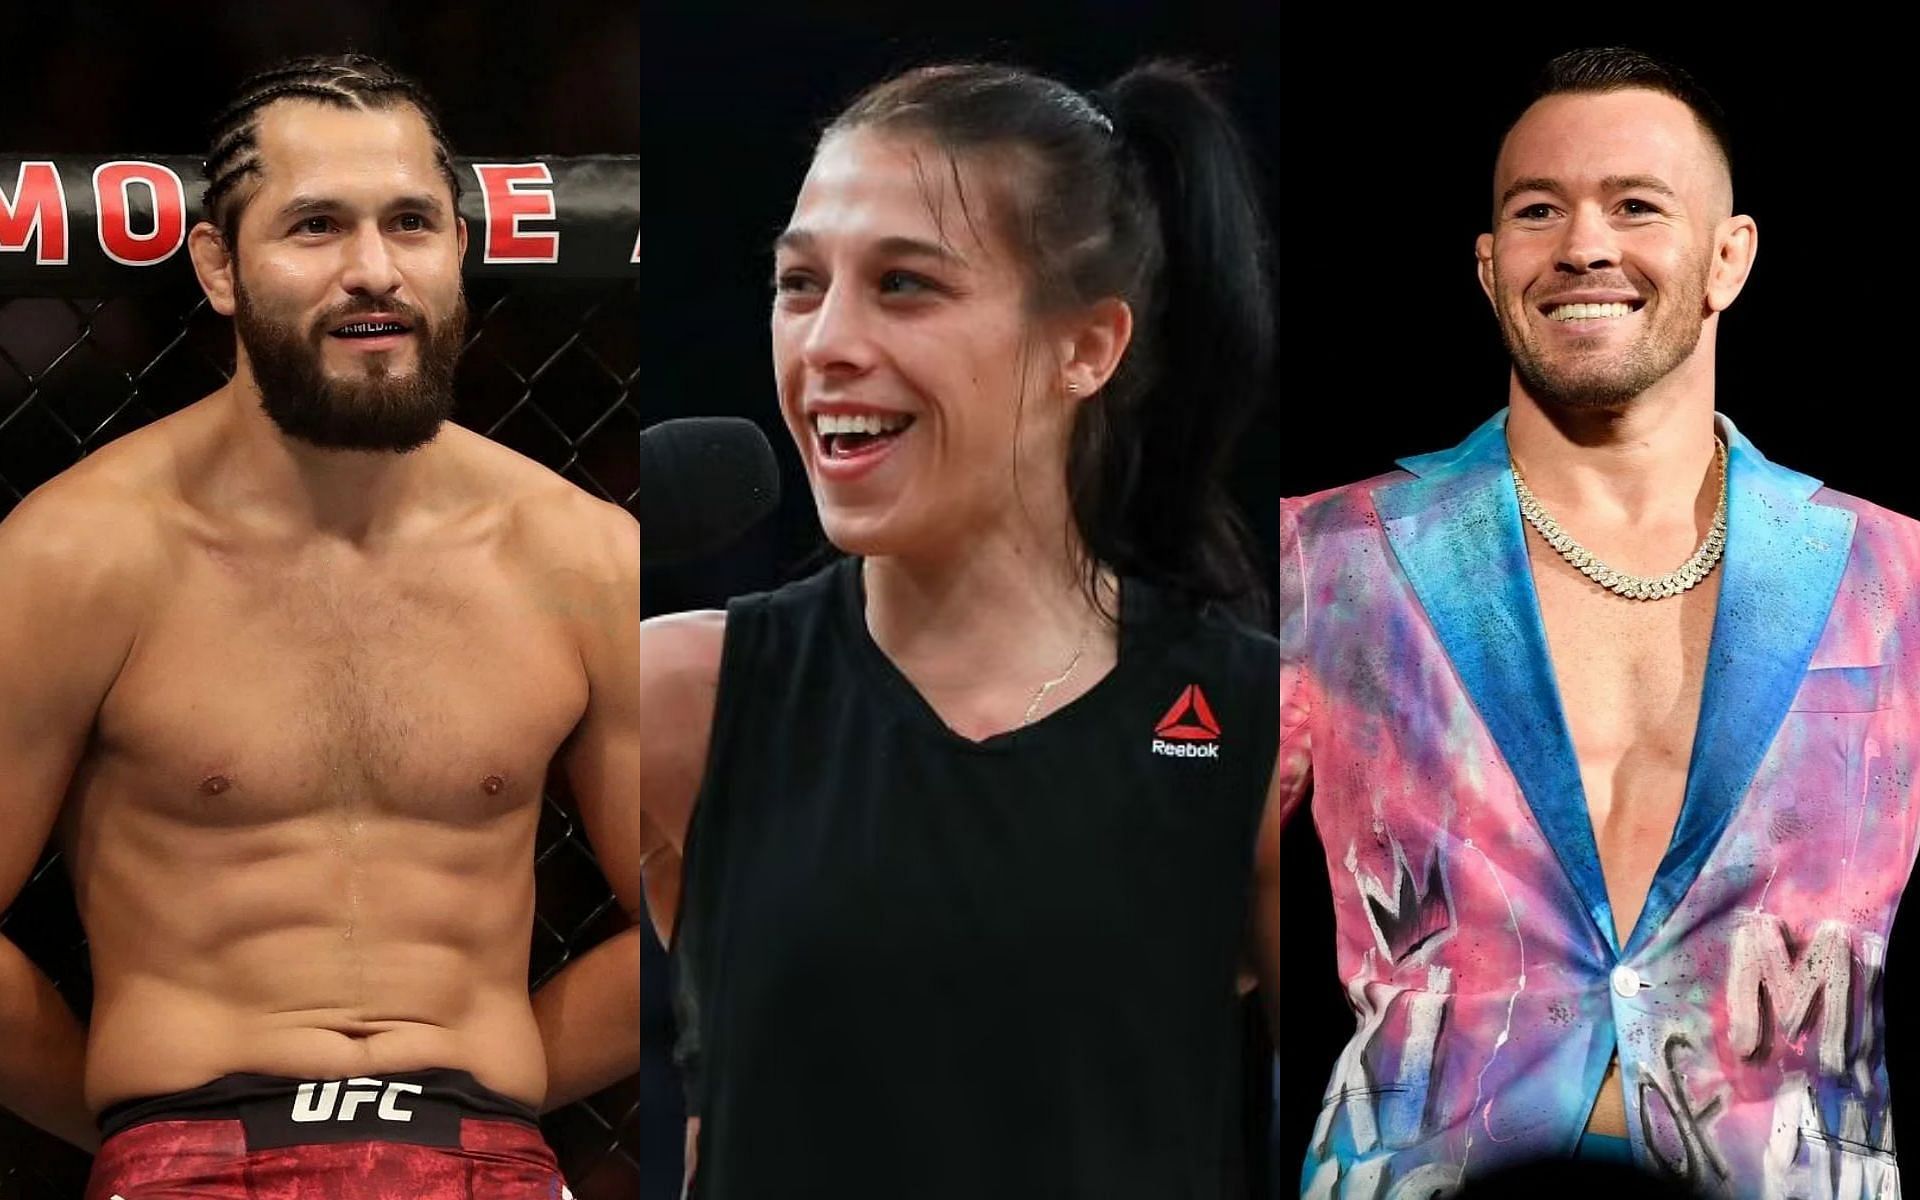 He’s gonna have a sex change and start fighting women – Jorge Masvidal sarcastically explains why Colby Covington talks about female fighters so much